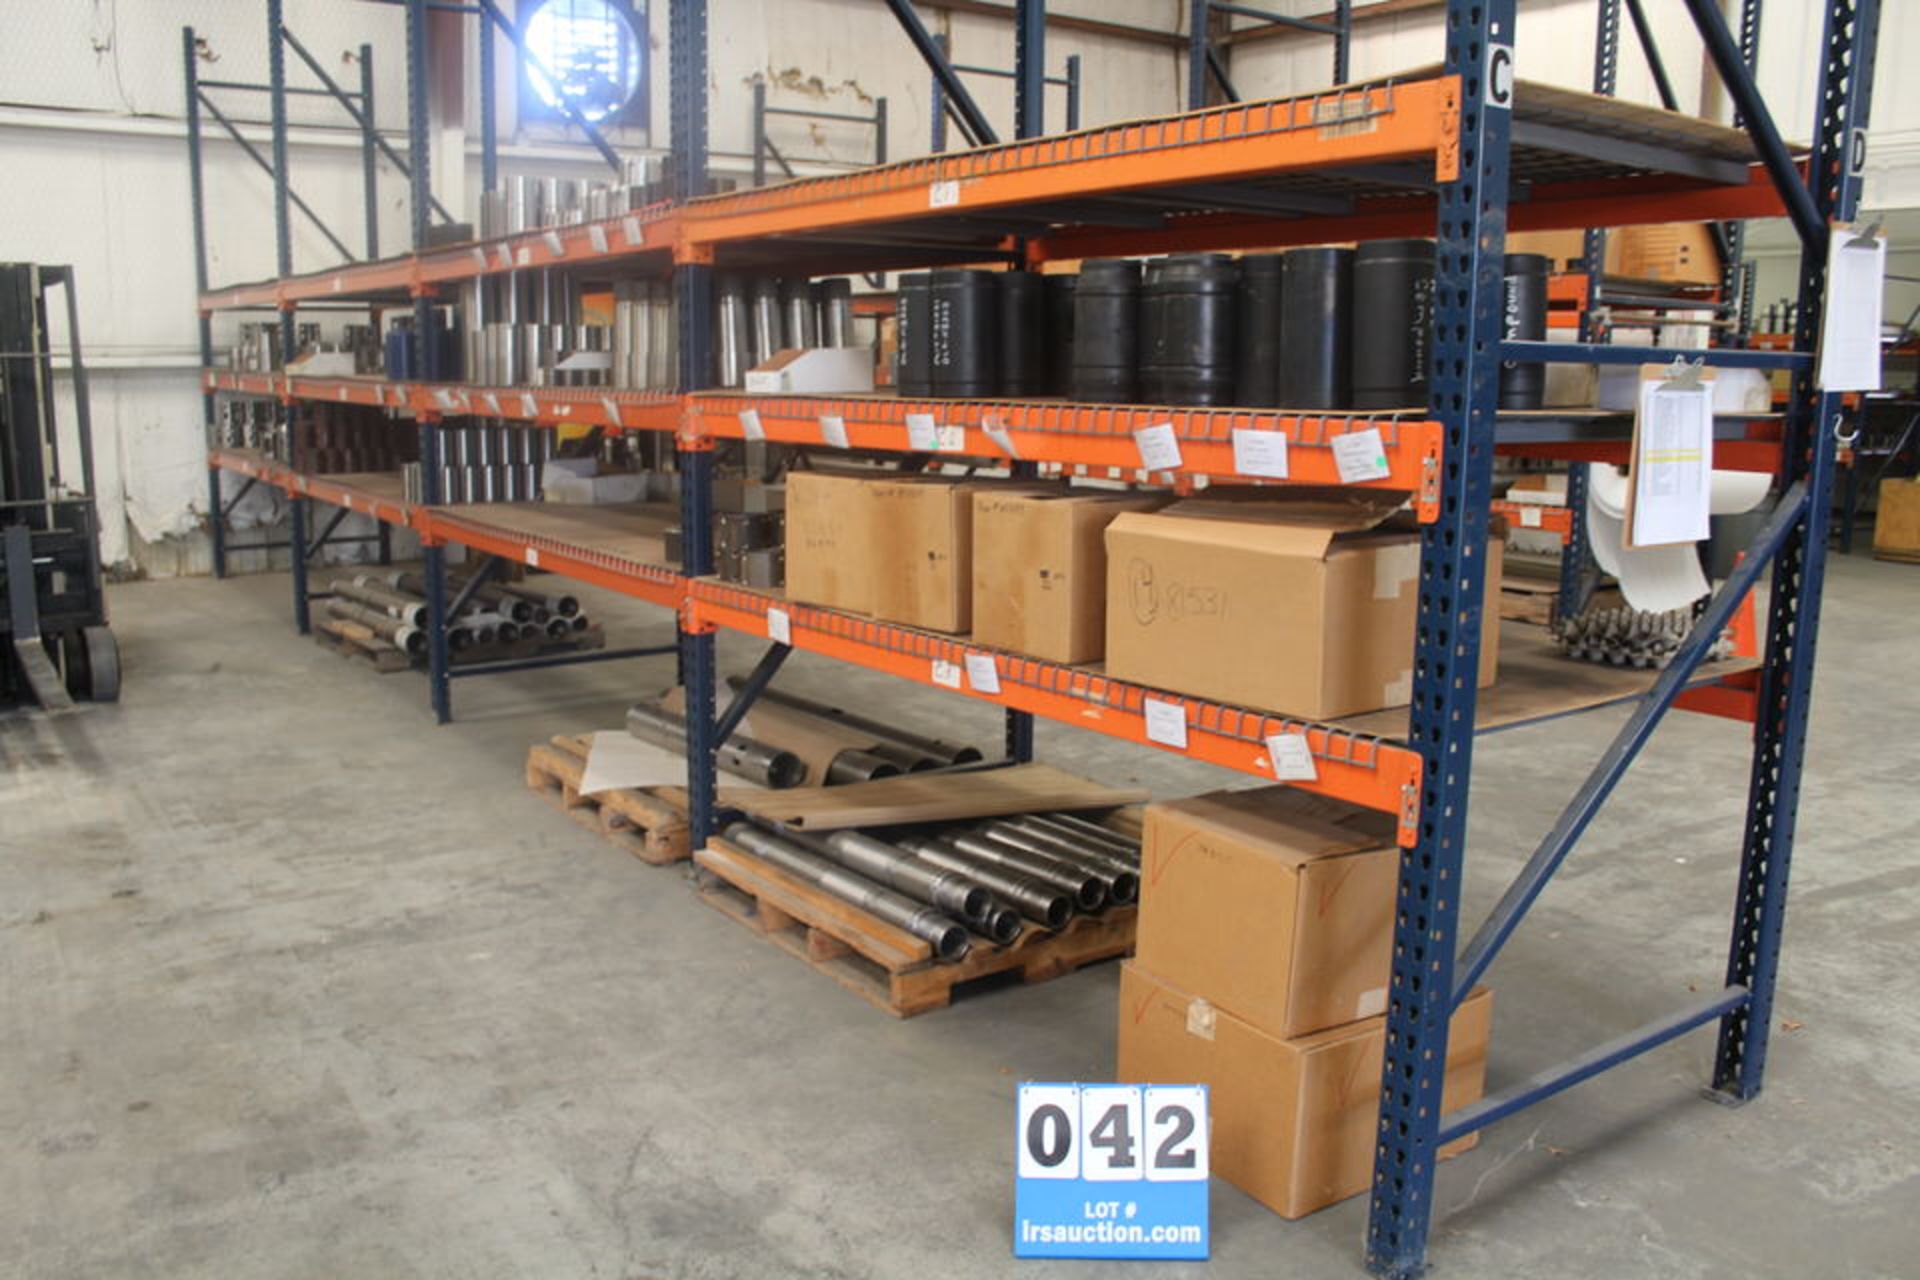 ALL INVENTORY THROUGHOUT BLDNG 'S ON PALLET RACKS *********** - Image 2 of 12